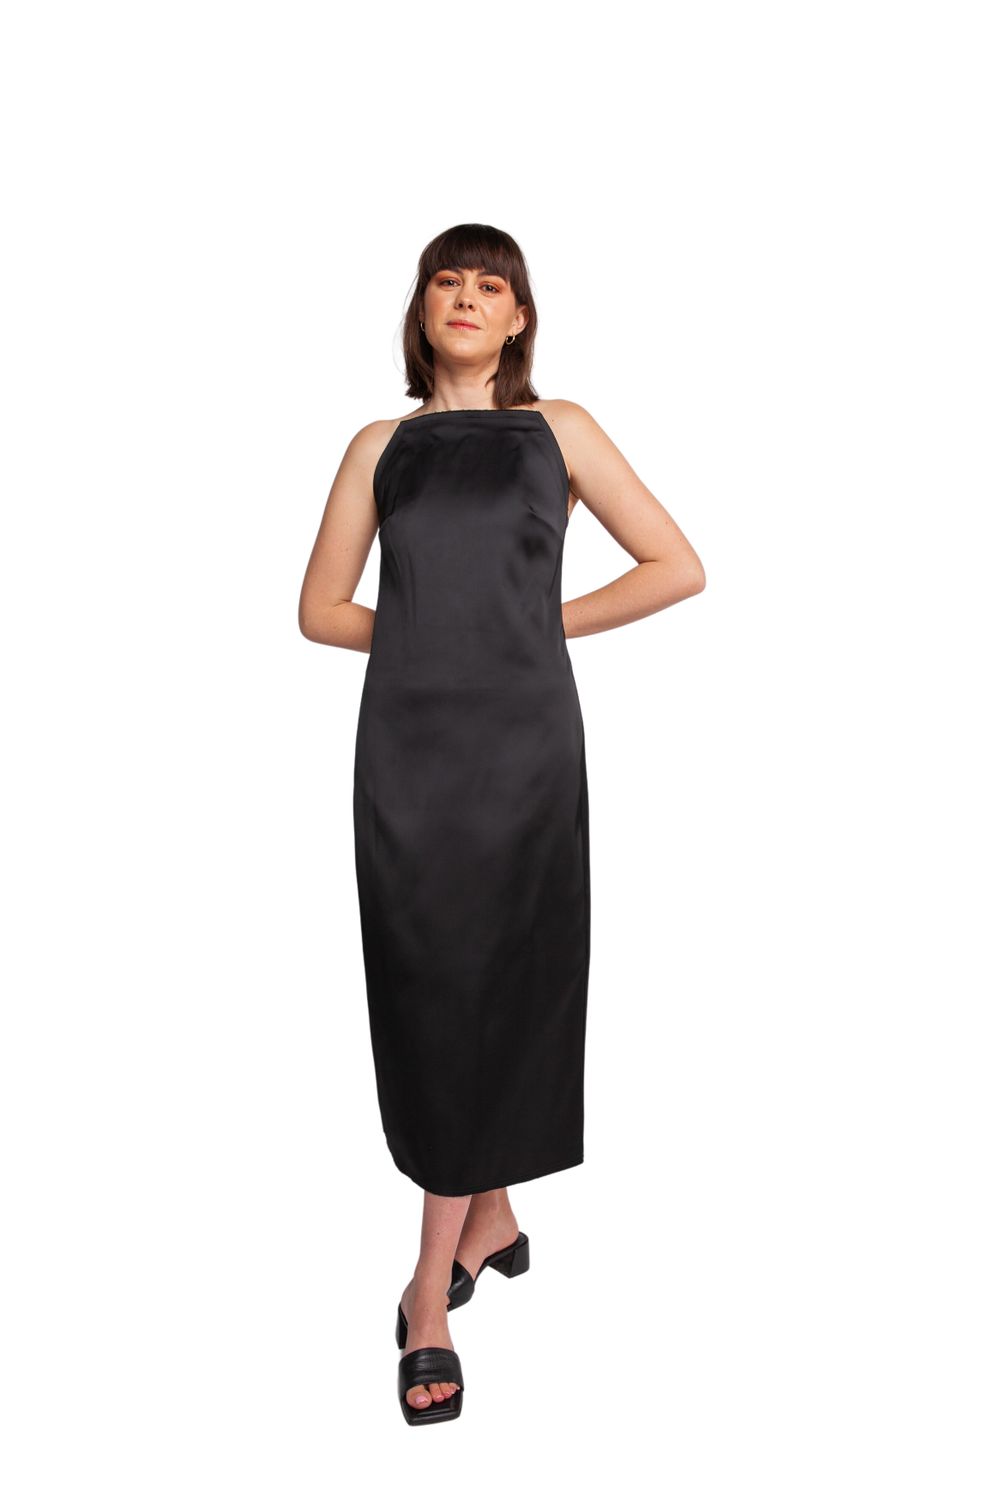 Harris Tapper - Andree Dress | All The Dresses